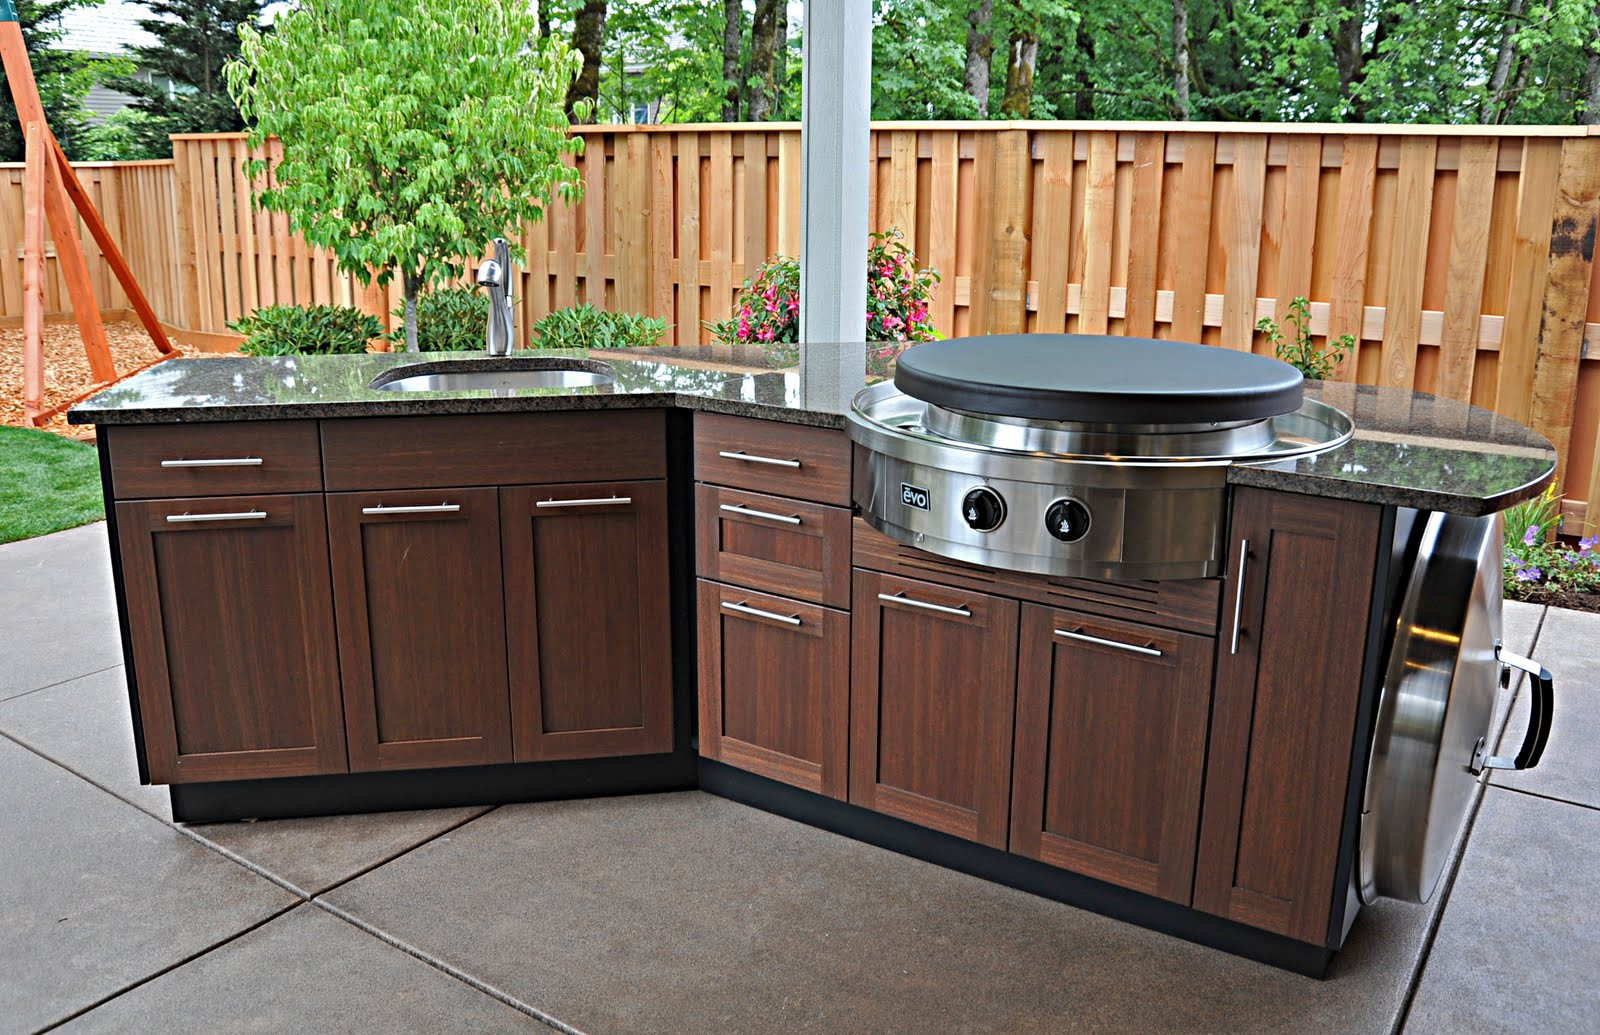 Outdoor Cabinets Kitchen
 Best Outdoor Kitchen Cabinets Ideas for Your Home